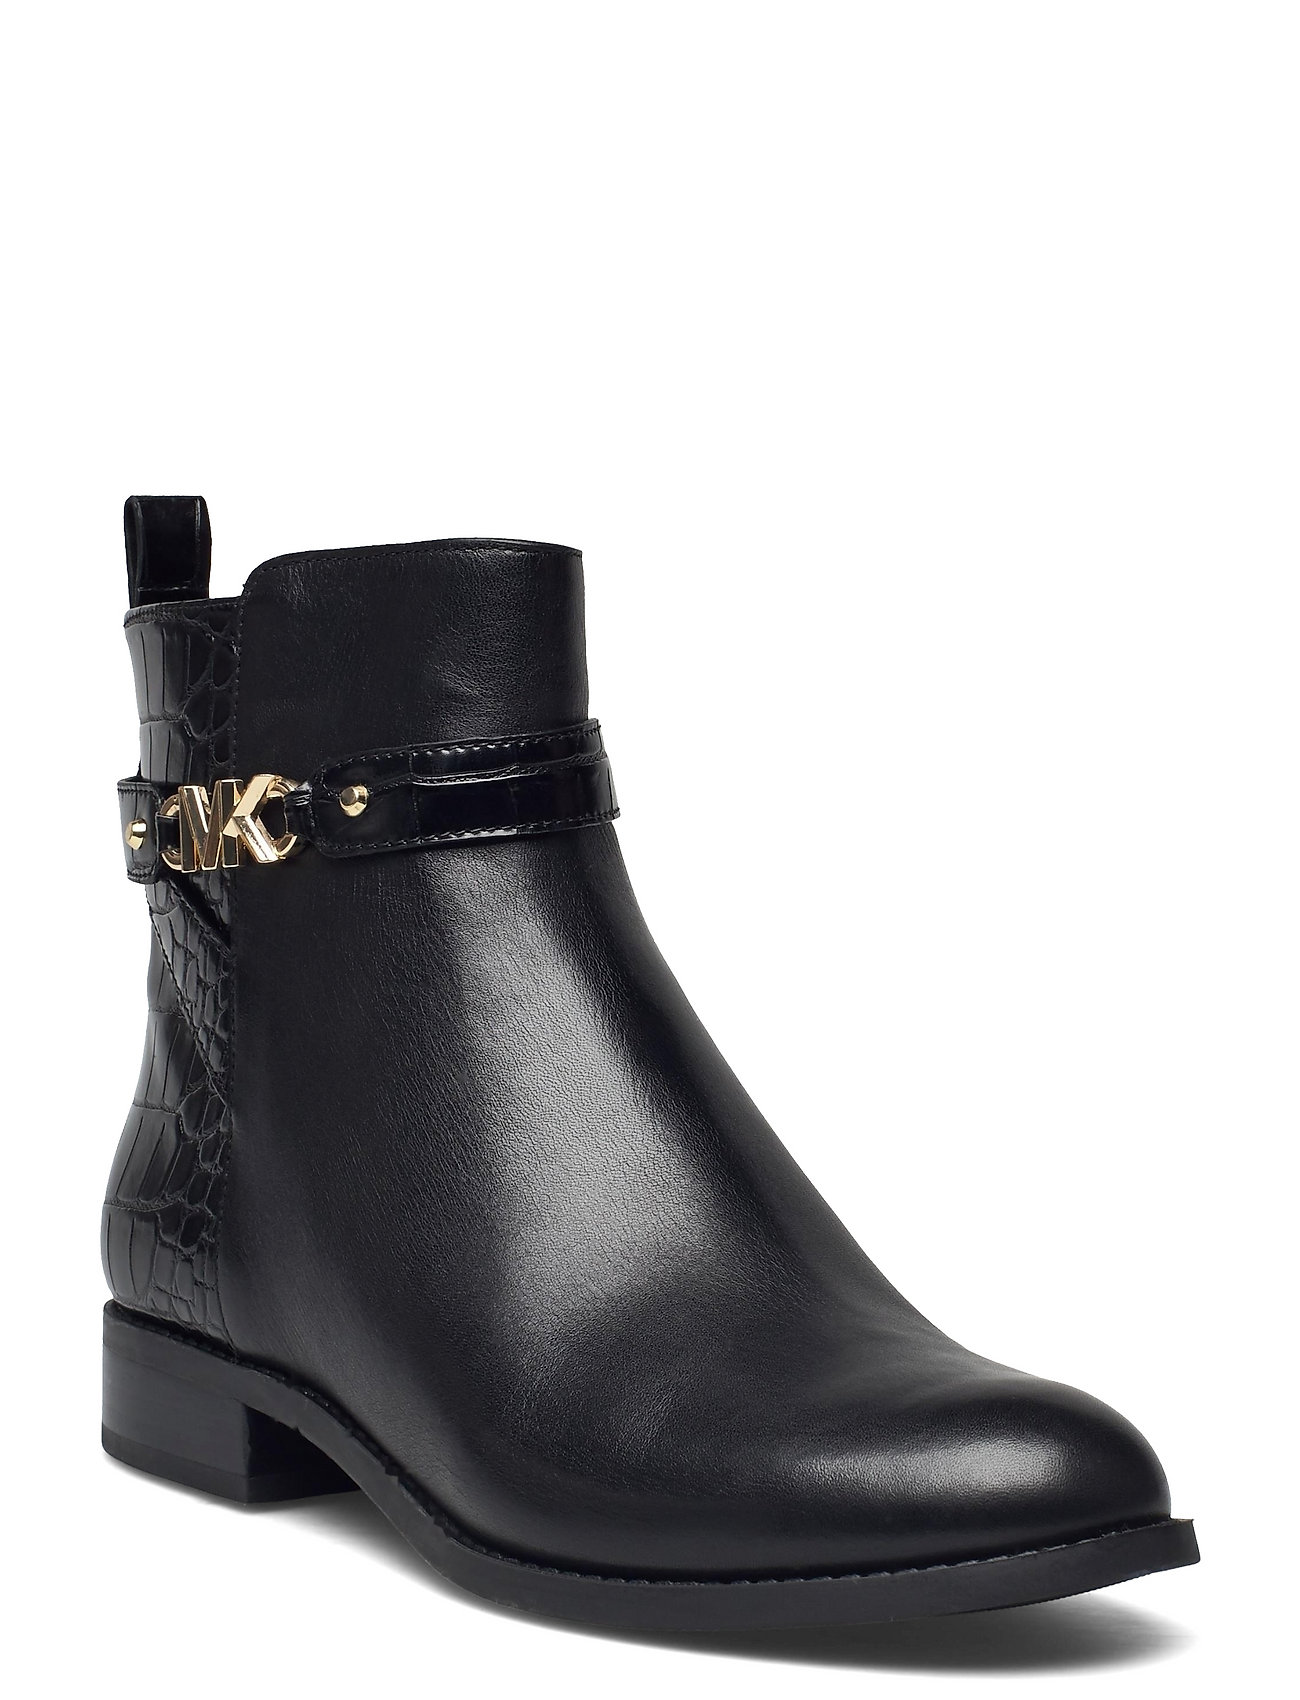 Farrah Flat Bootie Shoes Boots Ankle Boots Ankle Boot - Flat Musta Michael Kors